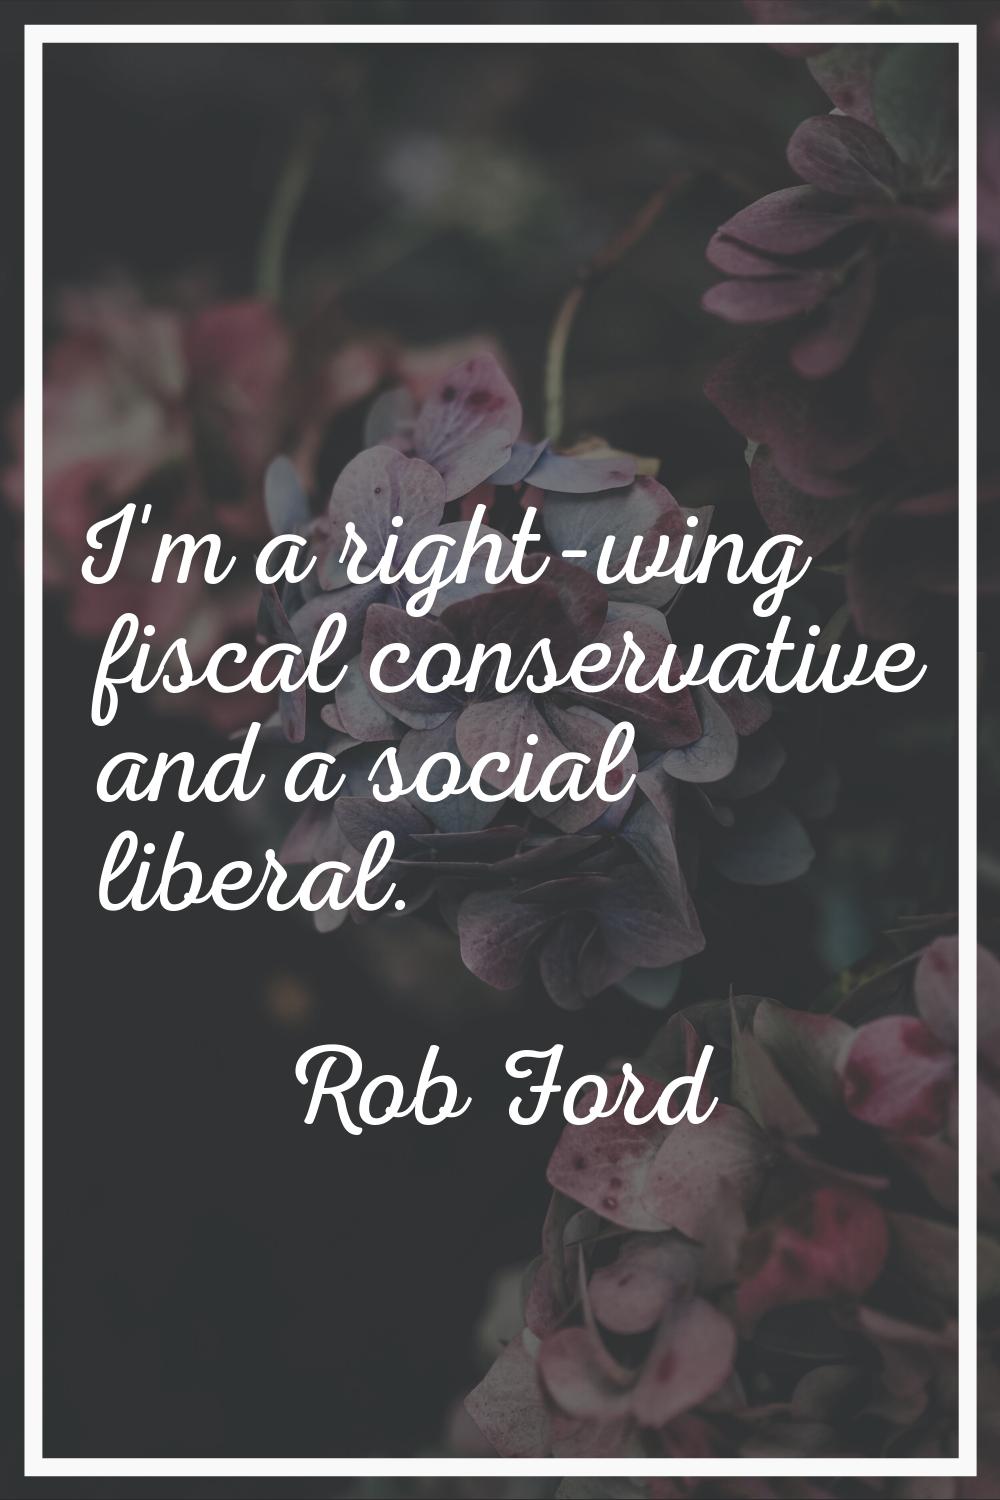 I'm a right-wing fiscal conservative and a social liberal.